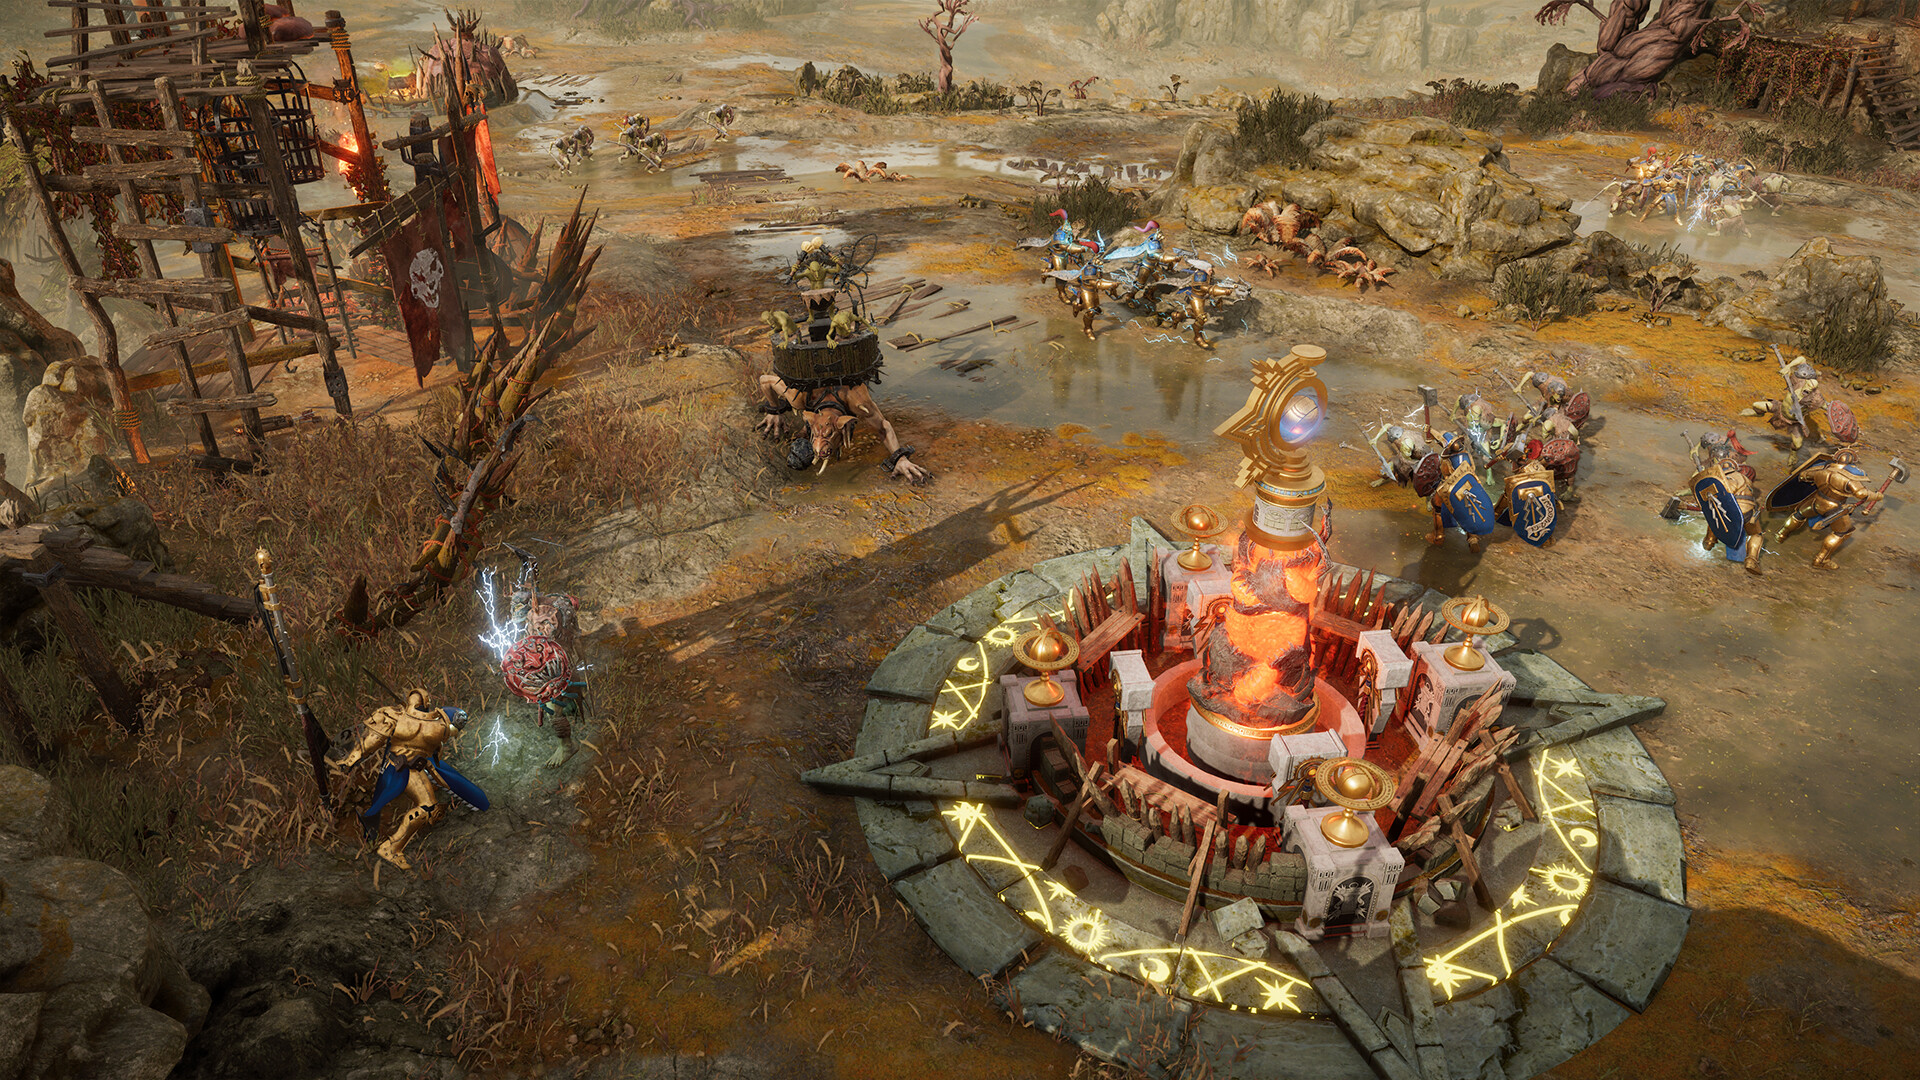 A screenshot from Warhammer Age of Sigmar Realms of Ruin